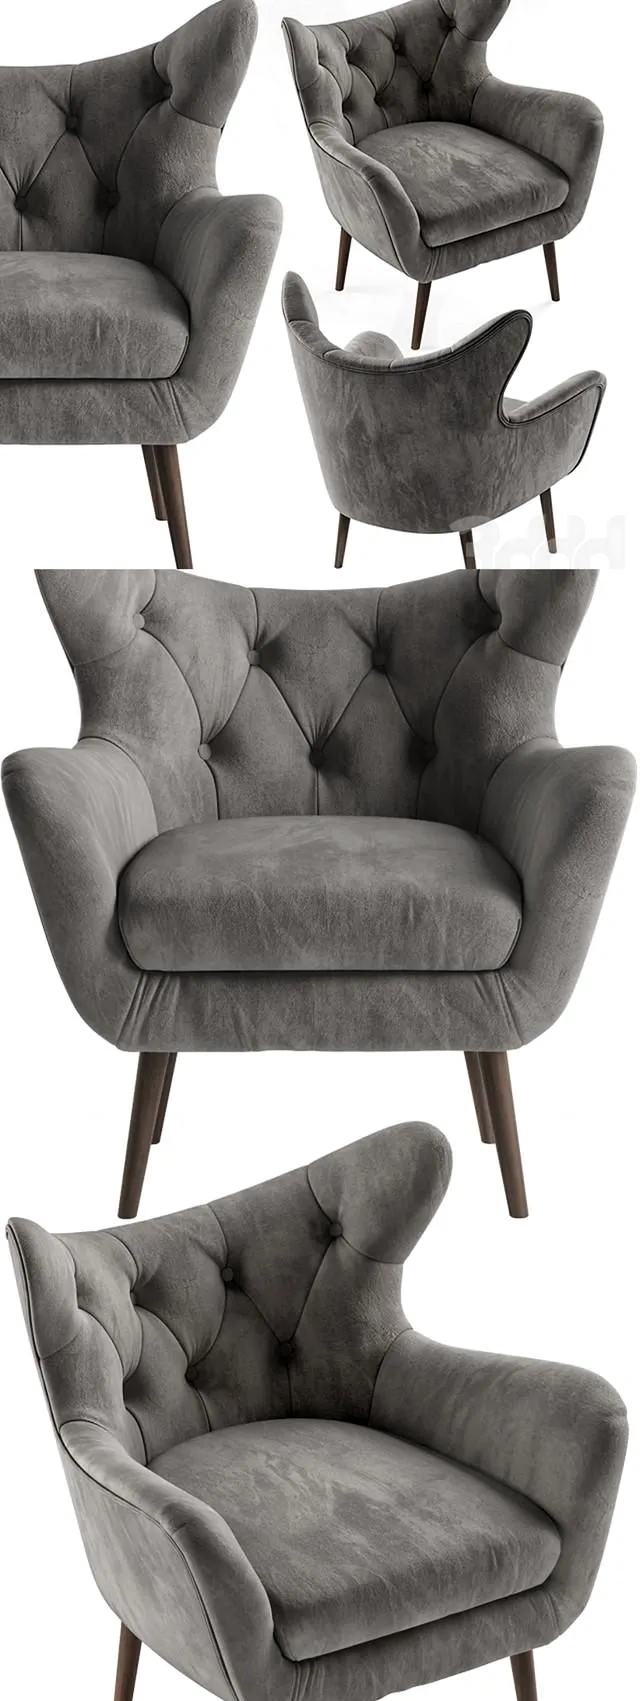 Bouck Wingback Chair download